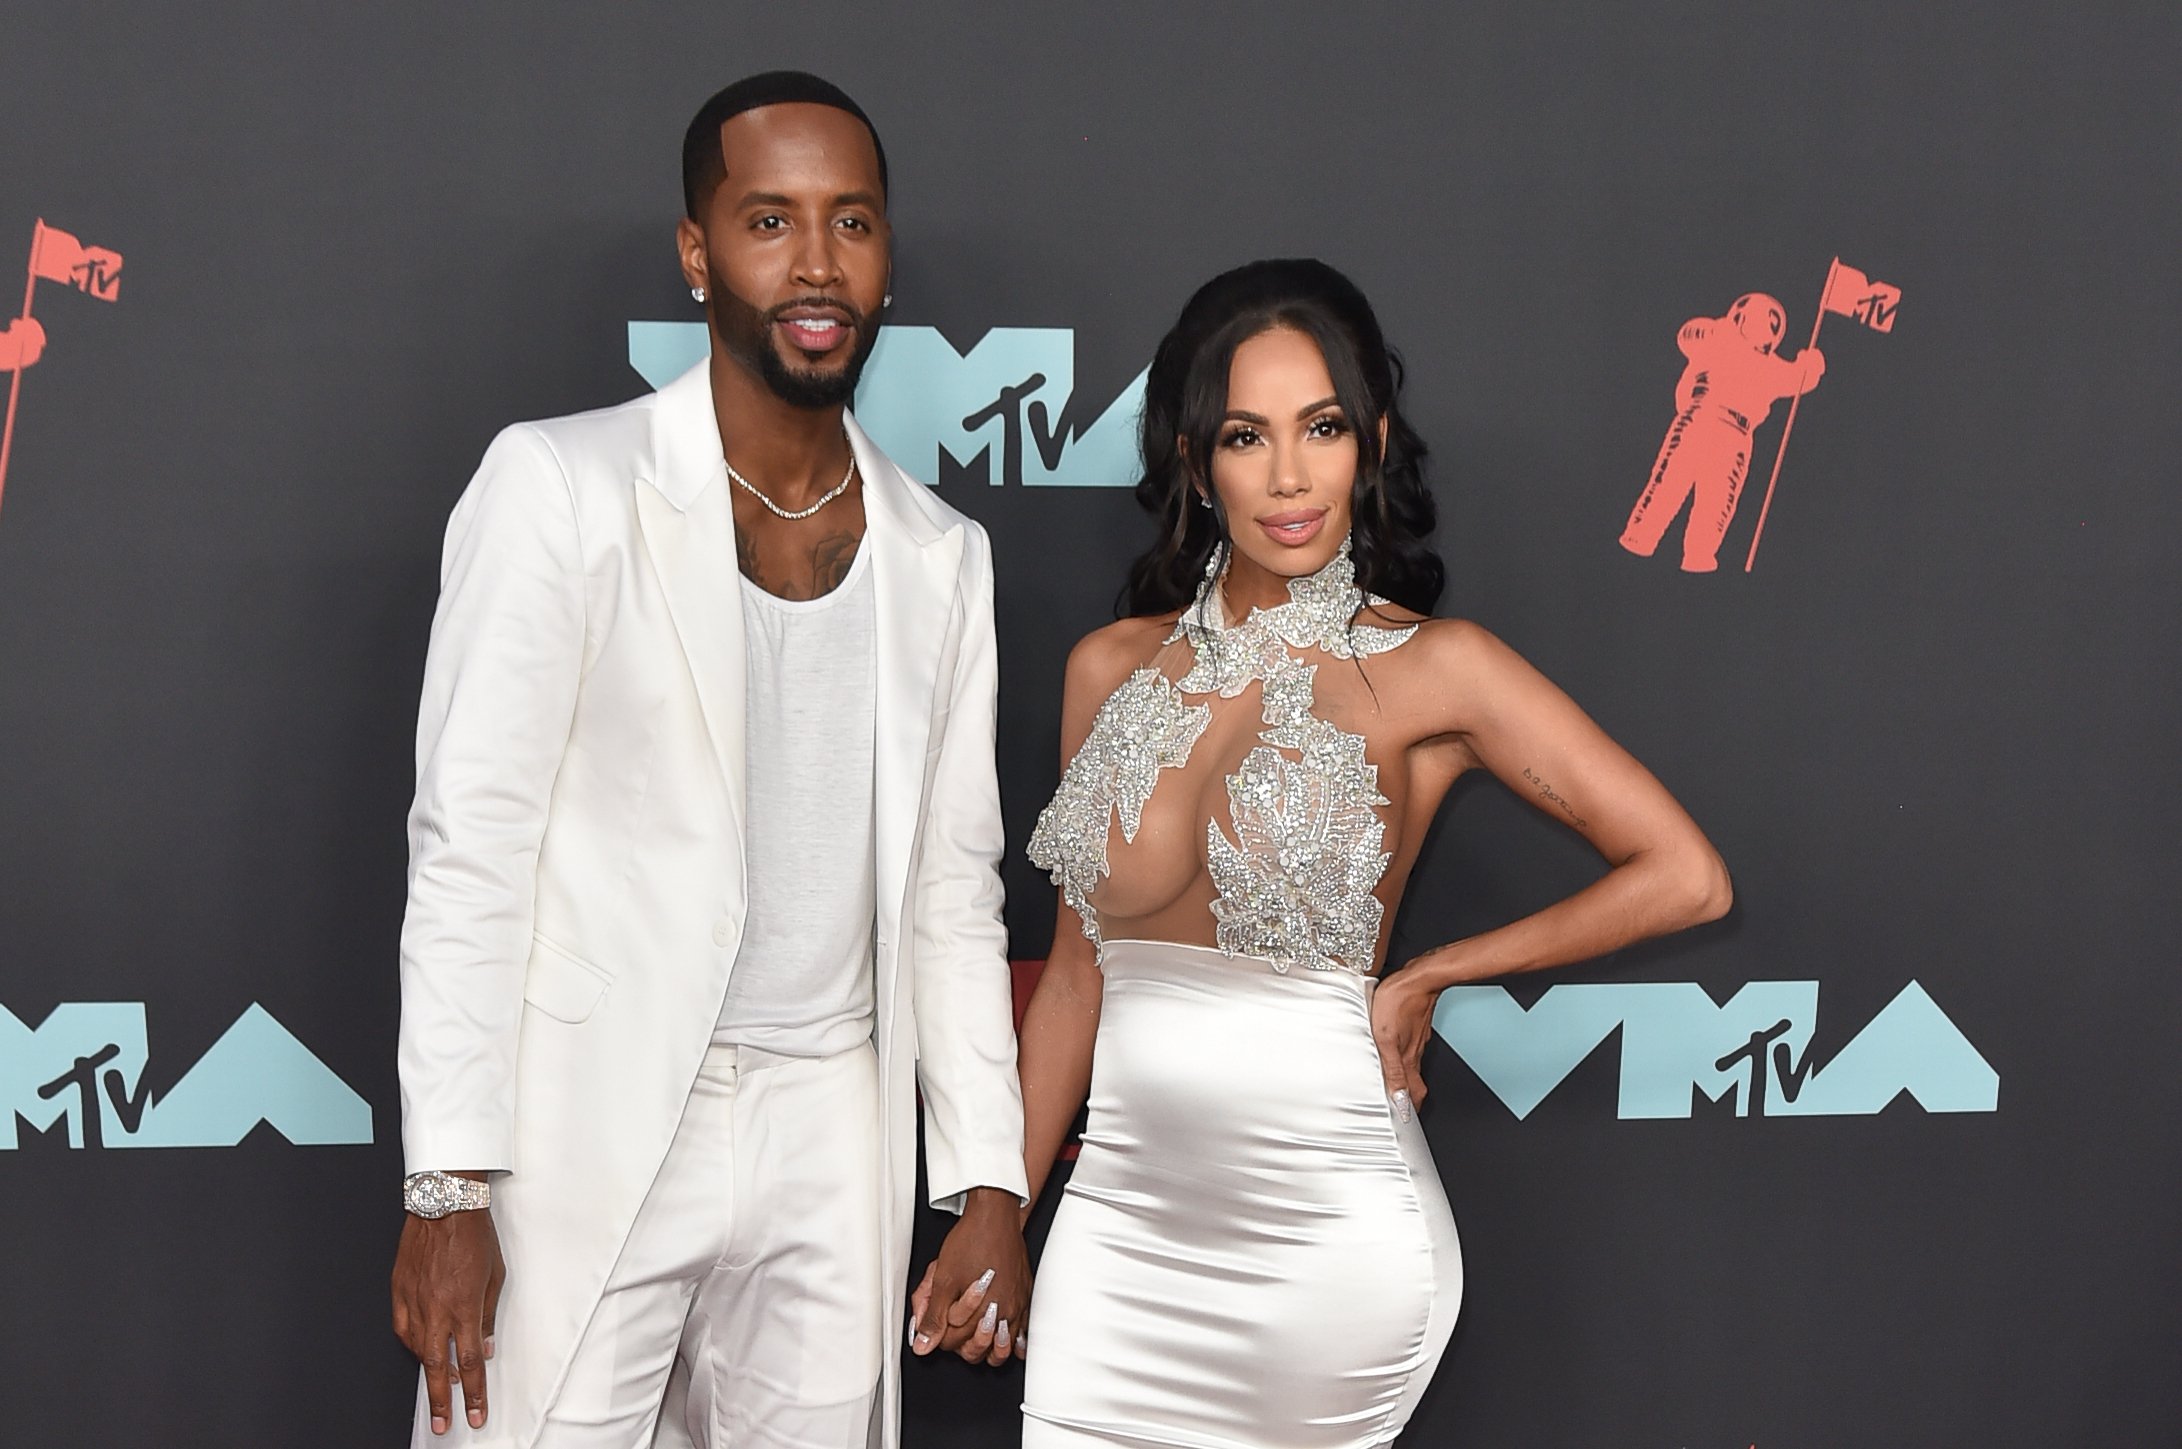 Safaree Samuels and Erica Mena at the 2019 MTV Video Music Awards at Prudential Center on August 26, 2019. | Photo: Getty Images